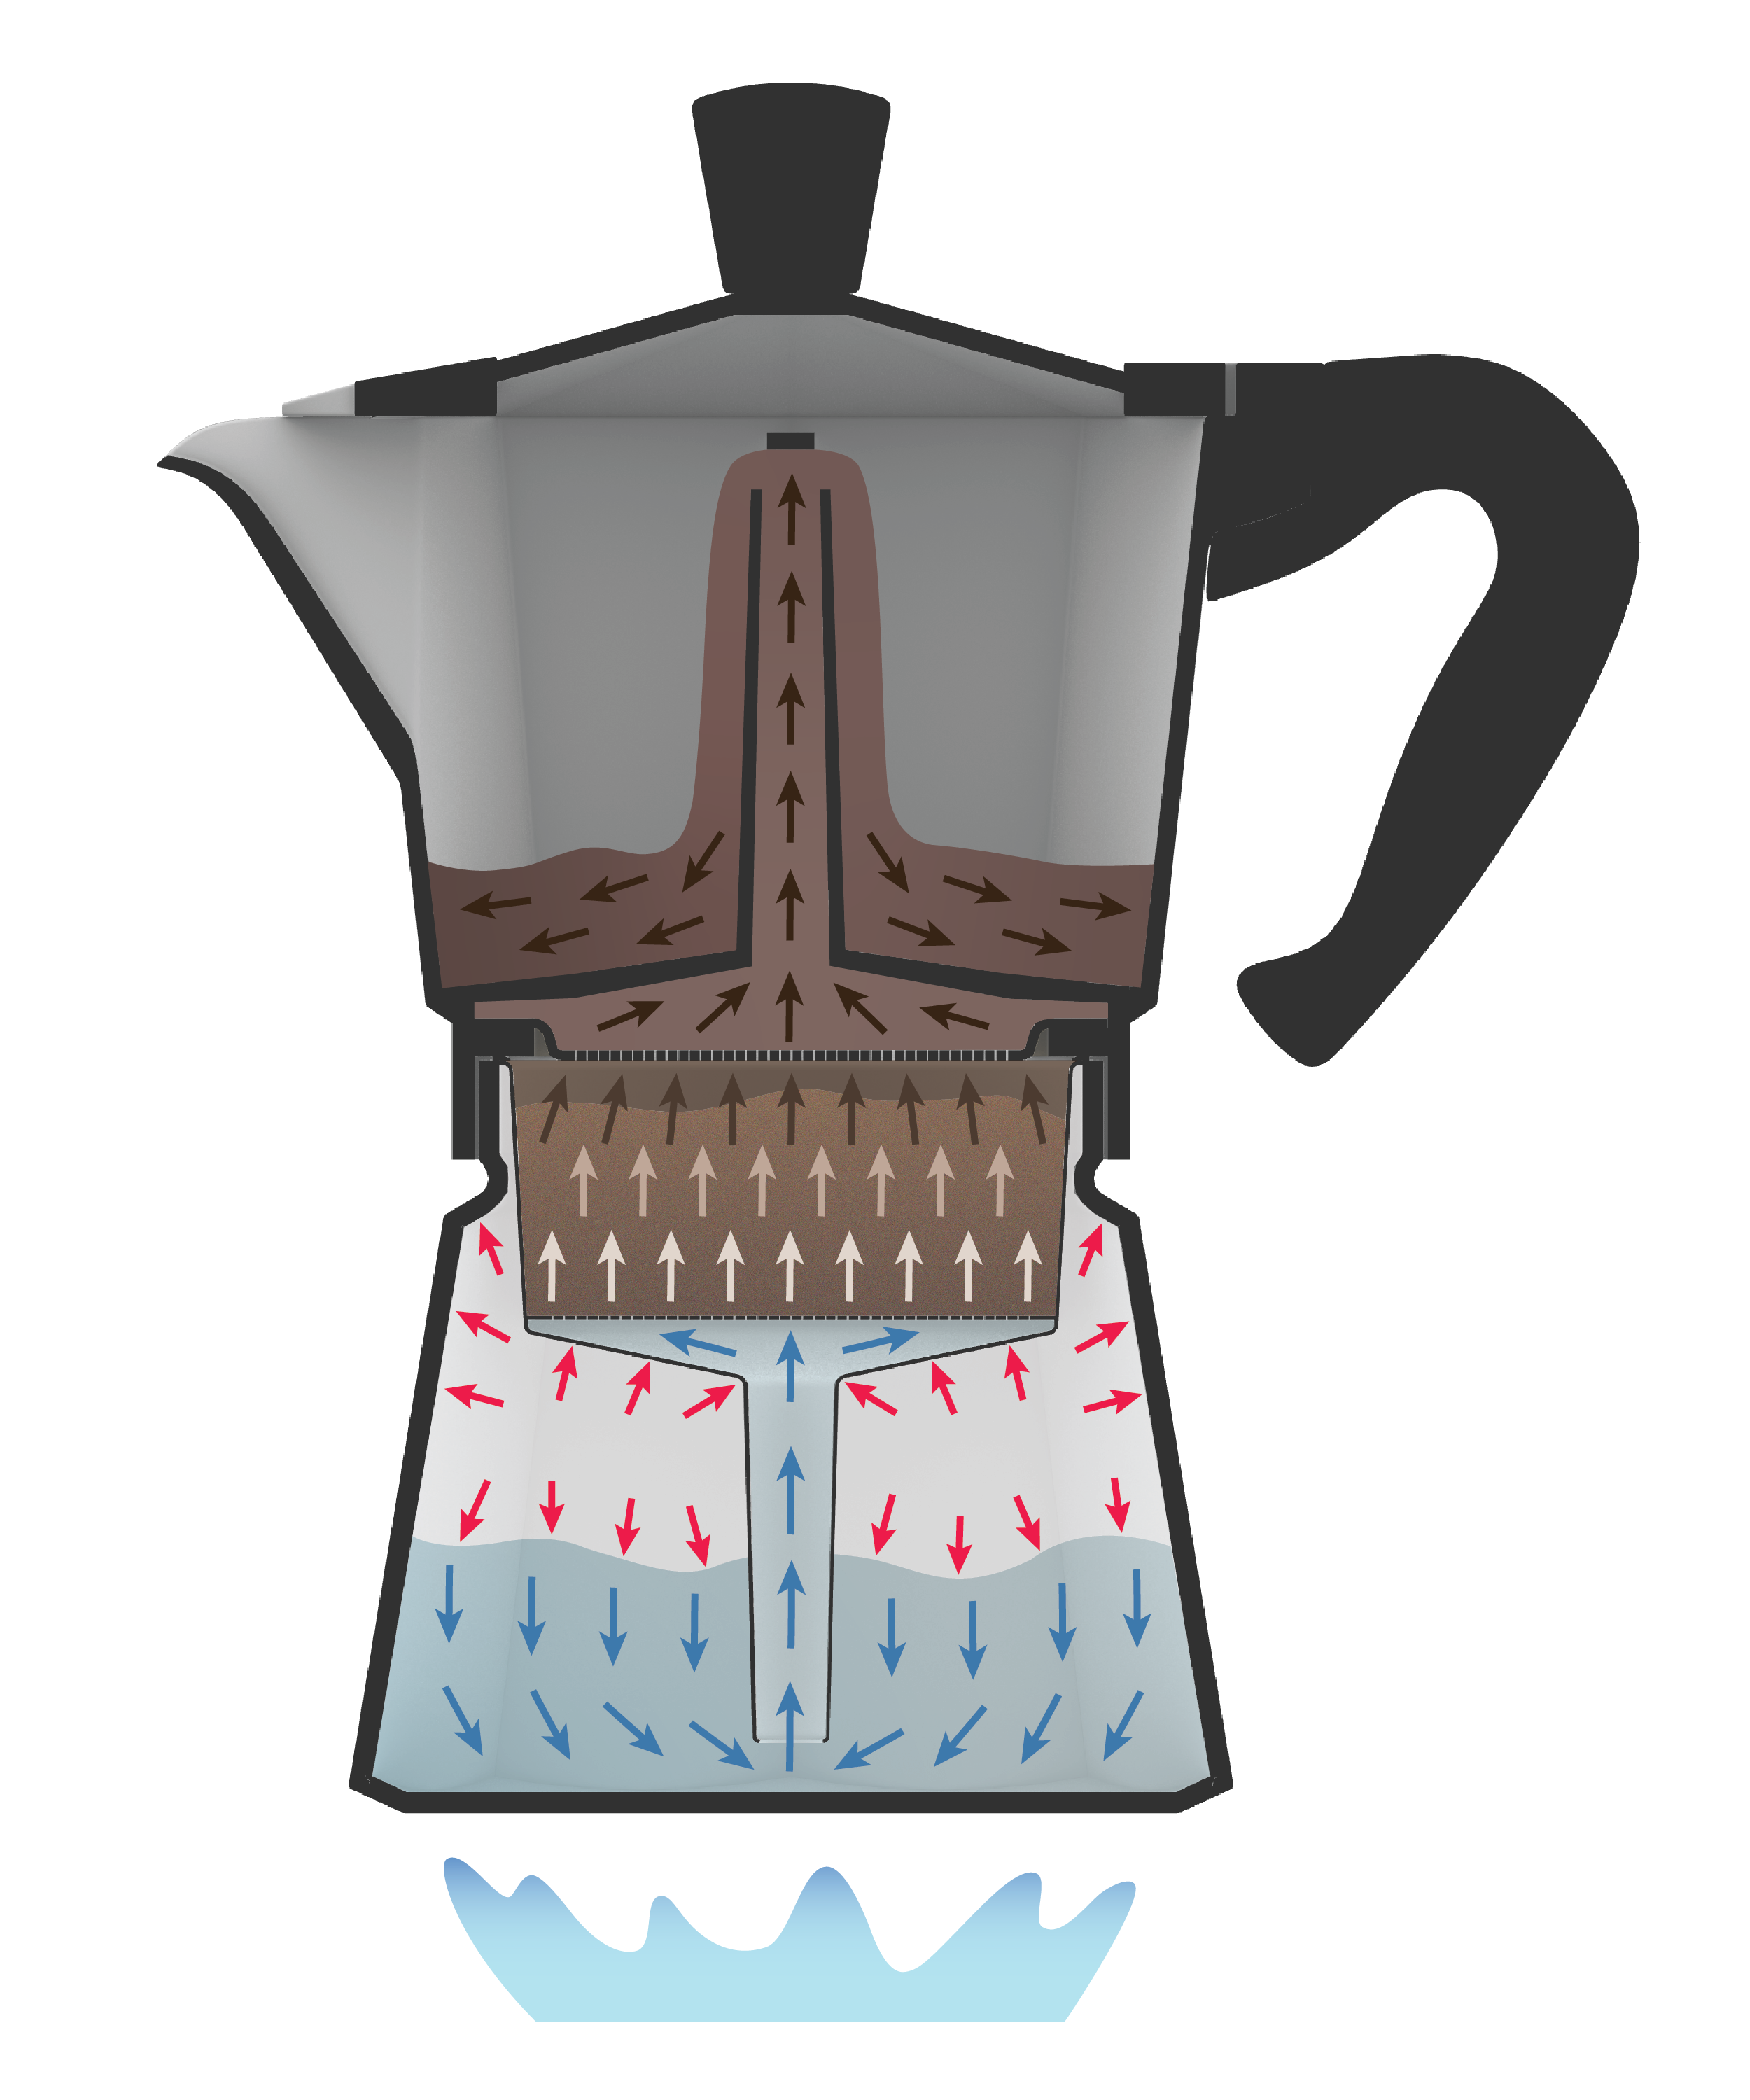 How does a moka pot work?  The simple science behind stove-top coffee